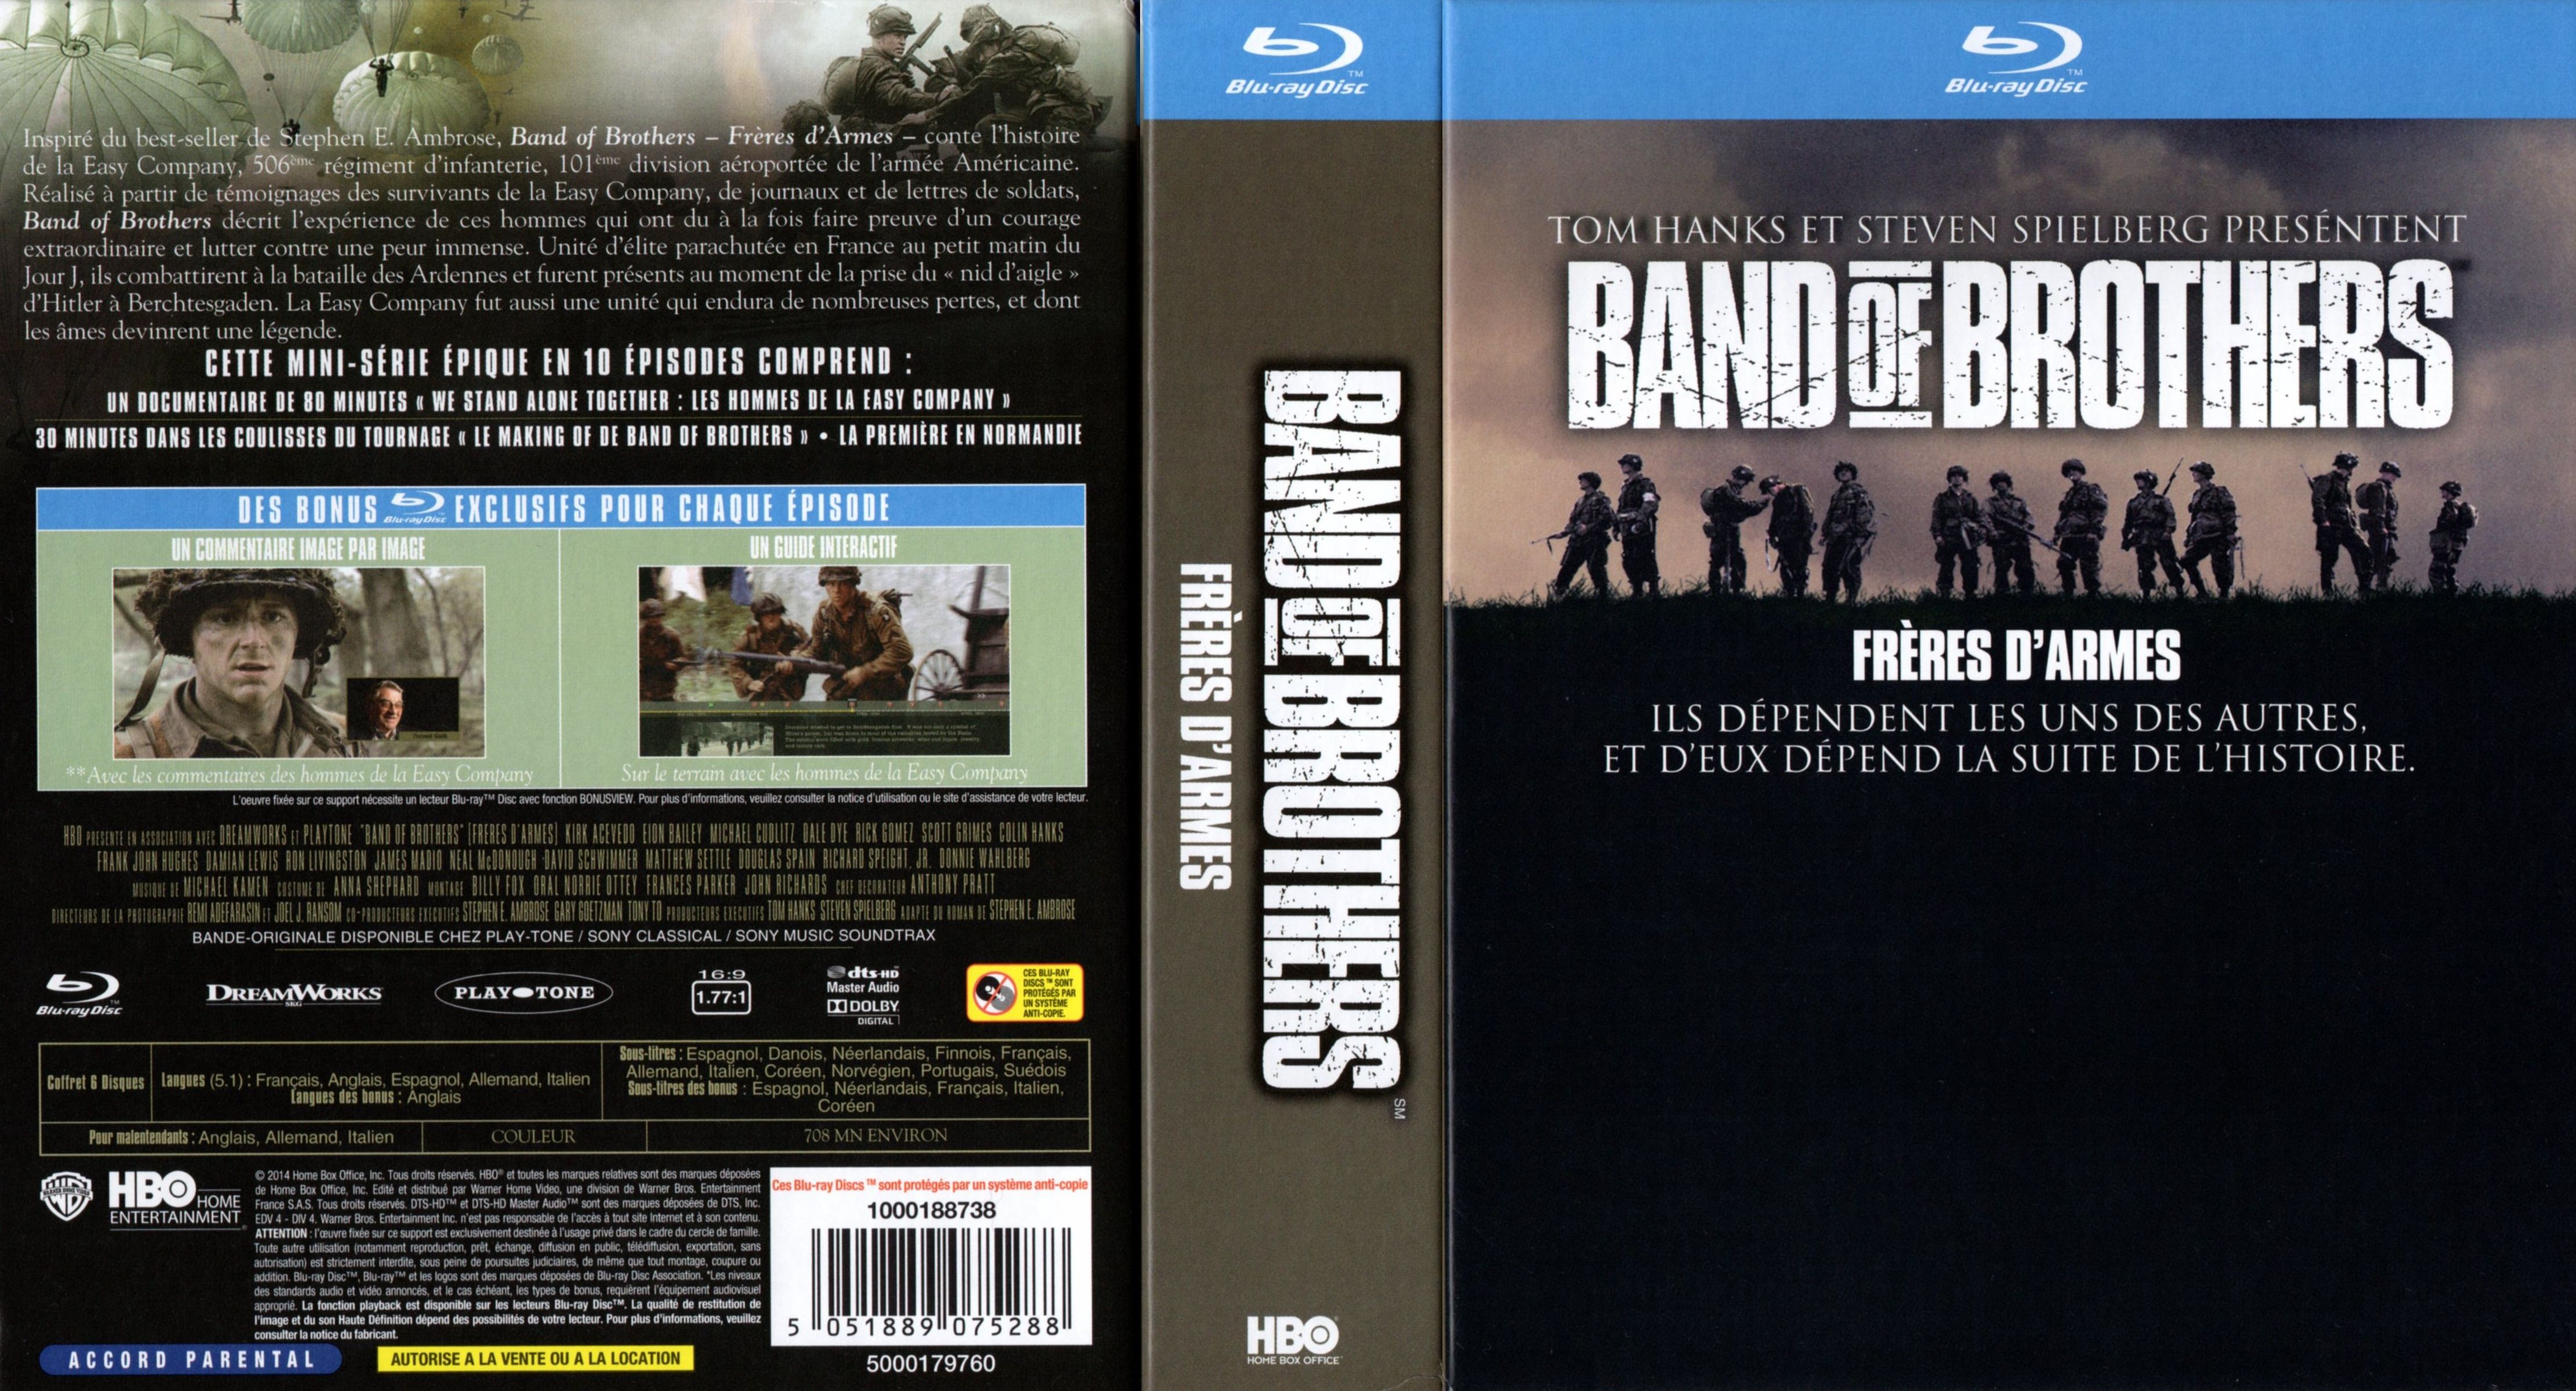 Jaquette DVD Band of Brothers (BLU-RAY)